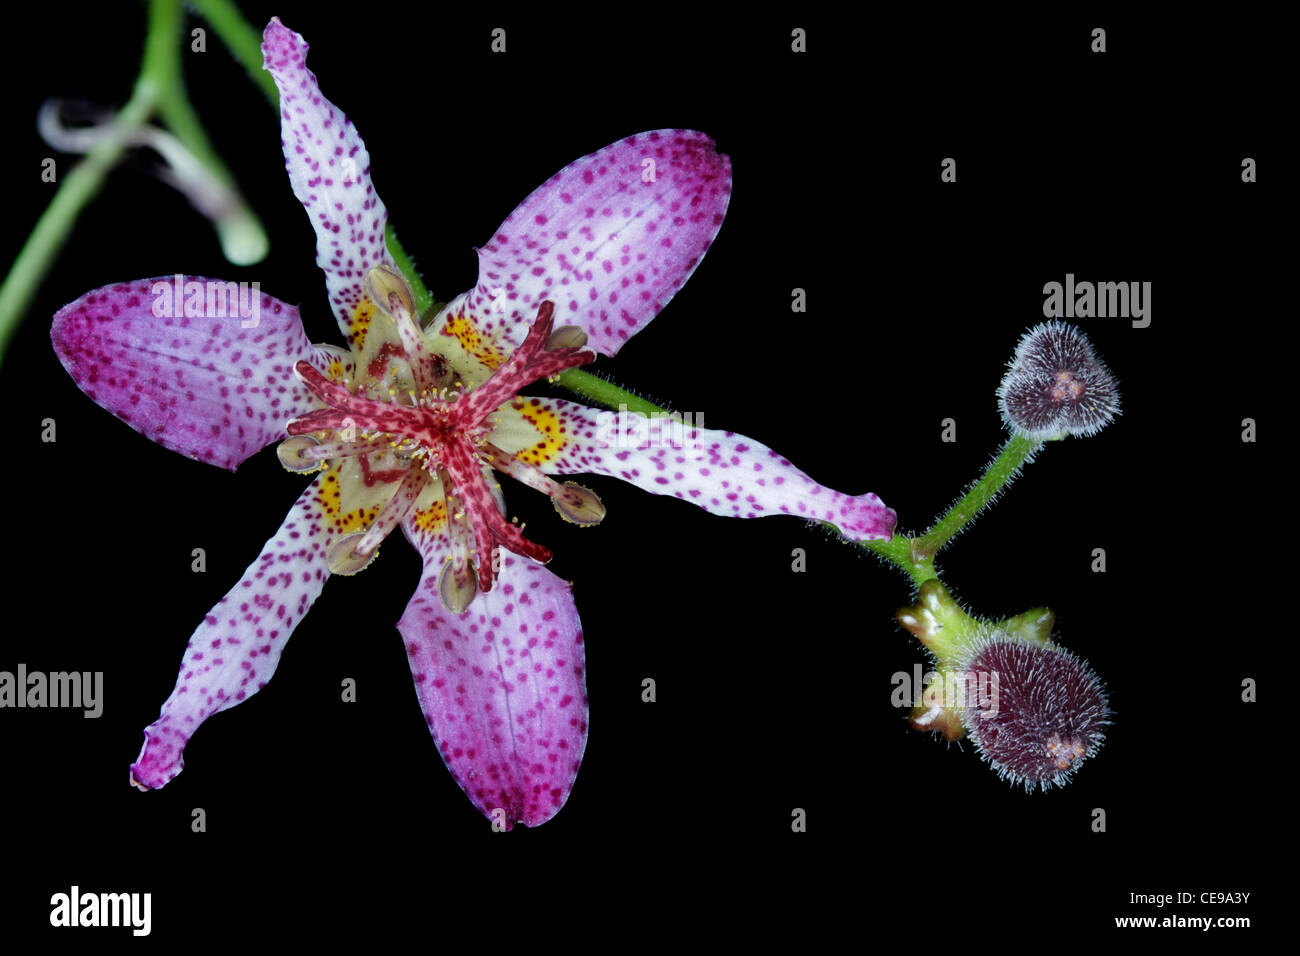 Flower and buds of a toad lily, Tricyrtis hirta Stock Photo